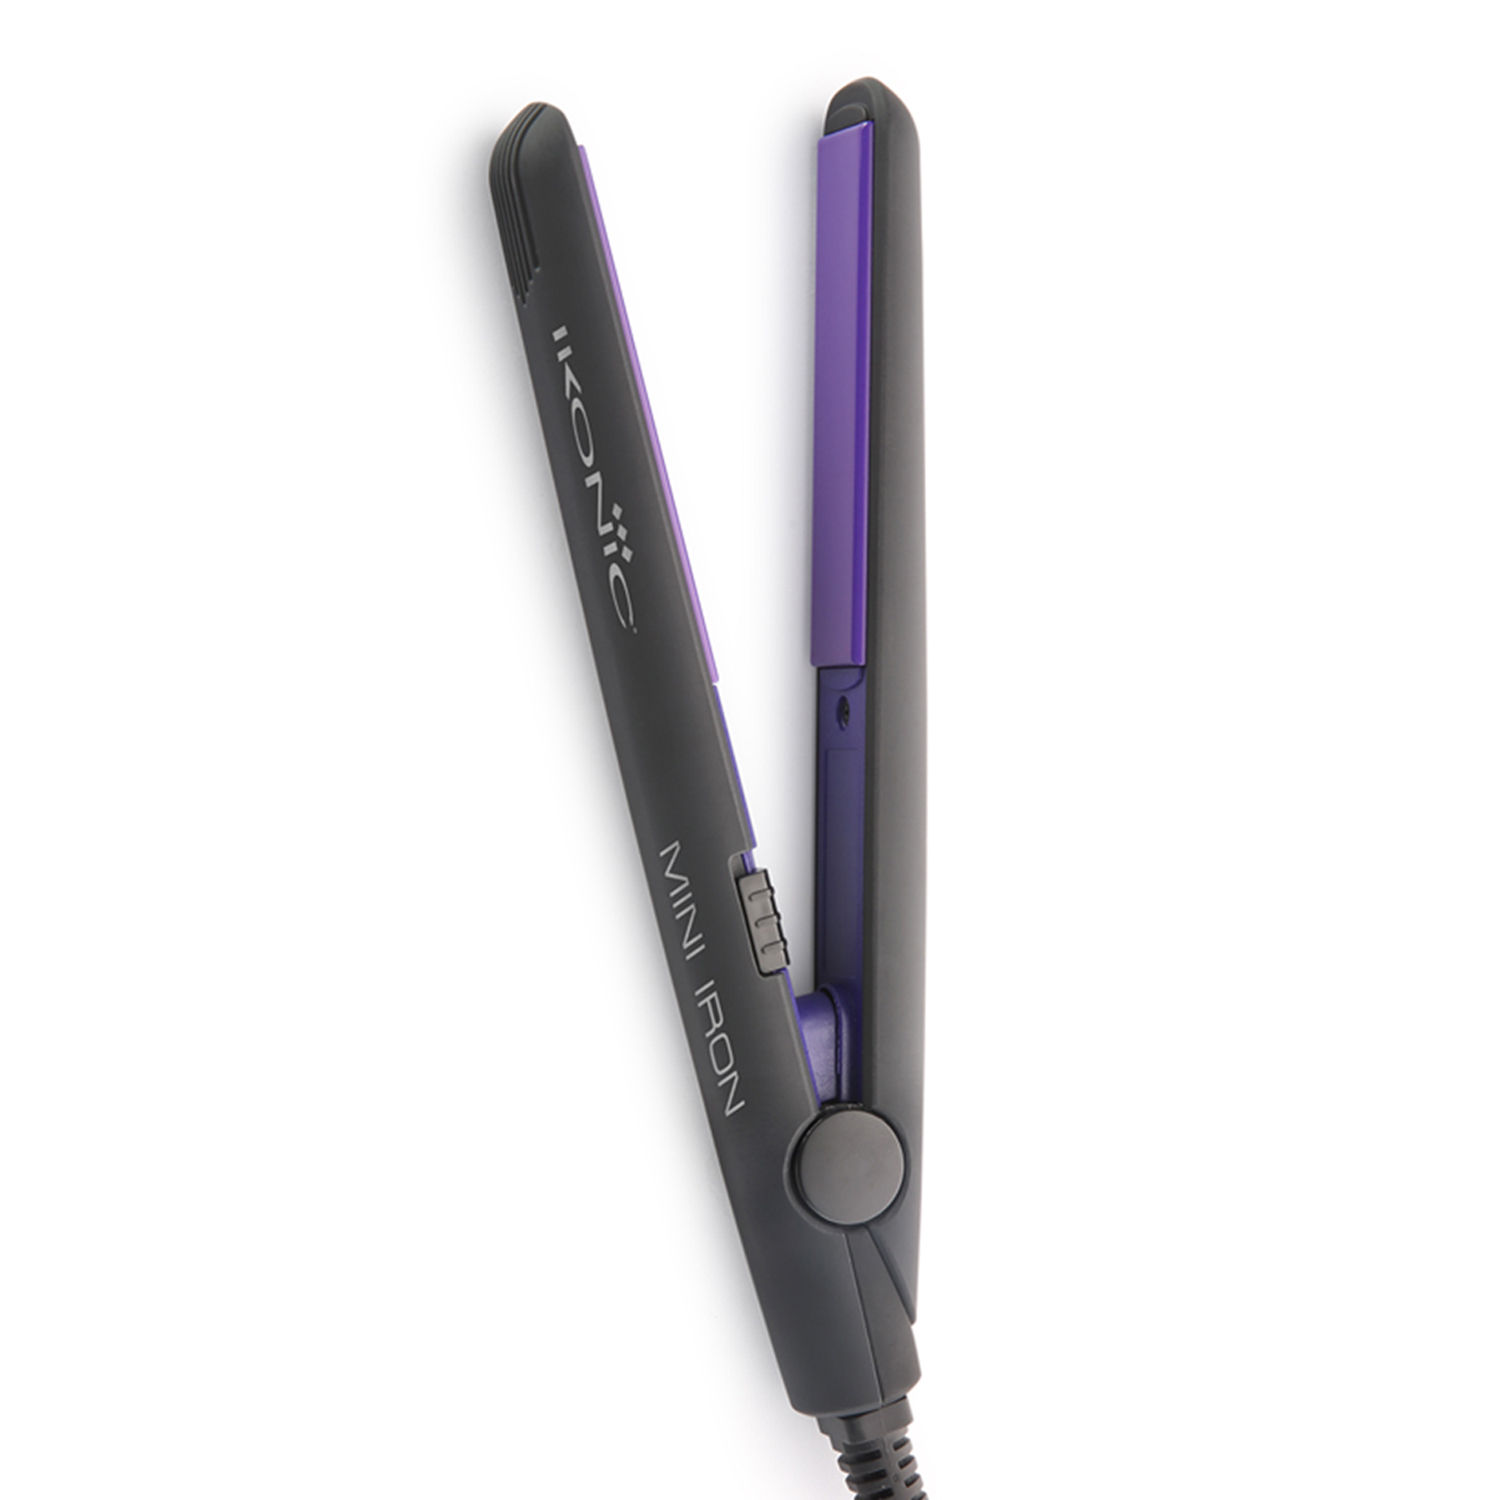 How to Use a Hair Straightener at Home Without Damaging Your Hair?